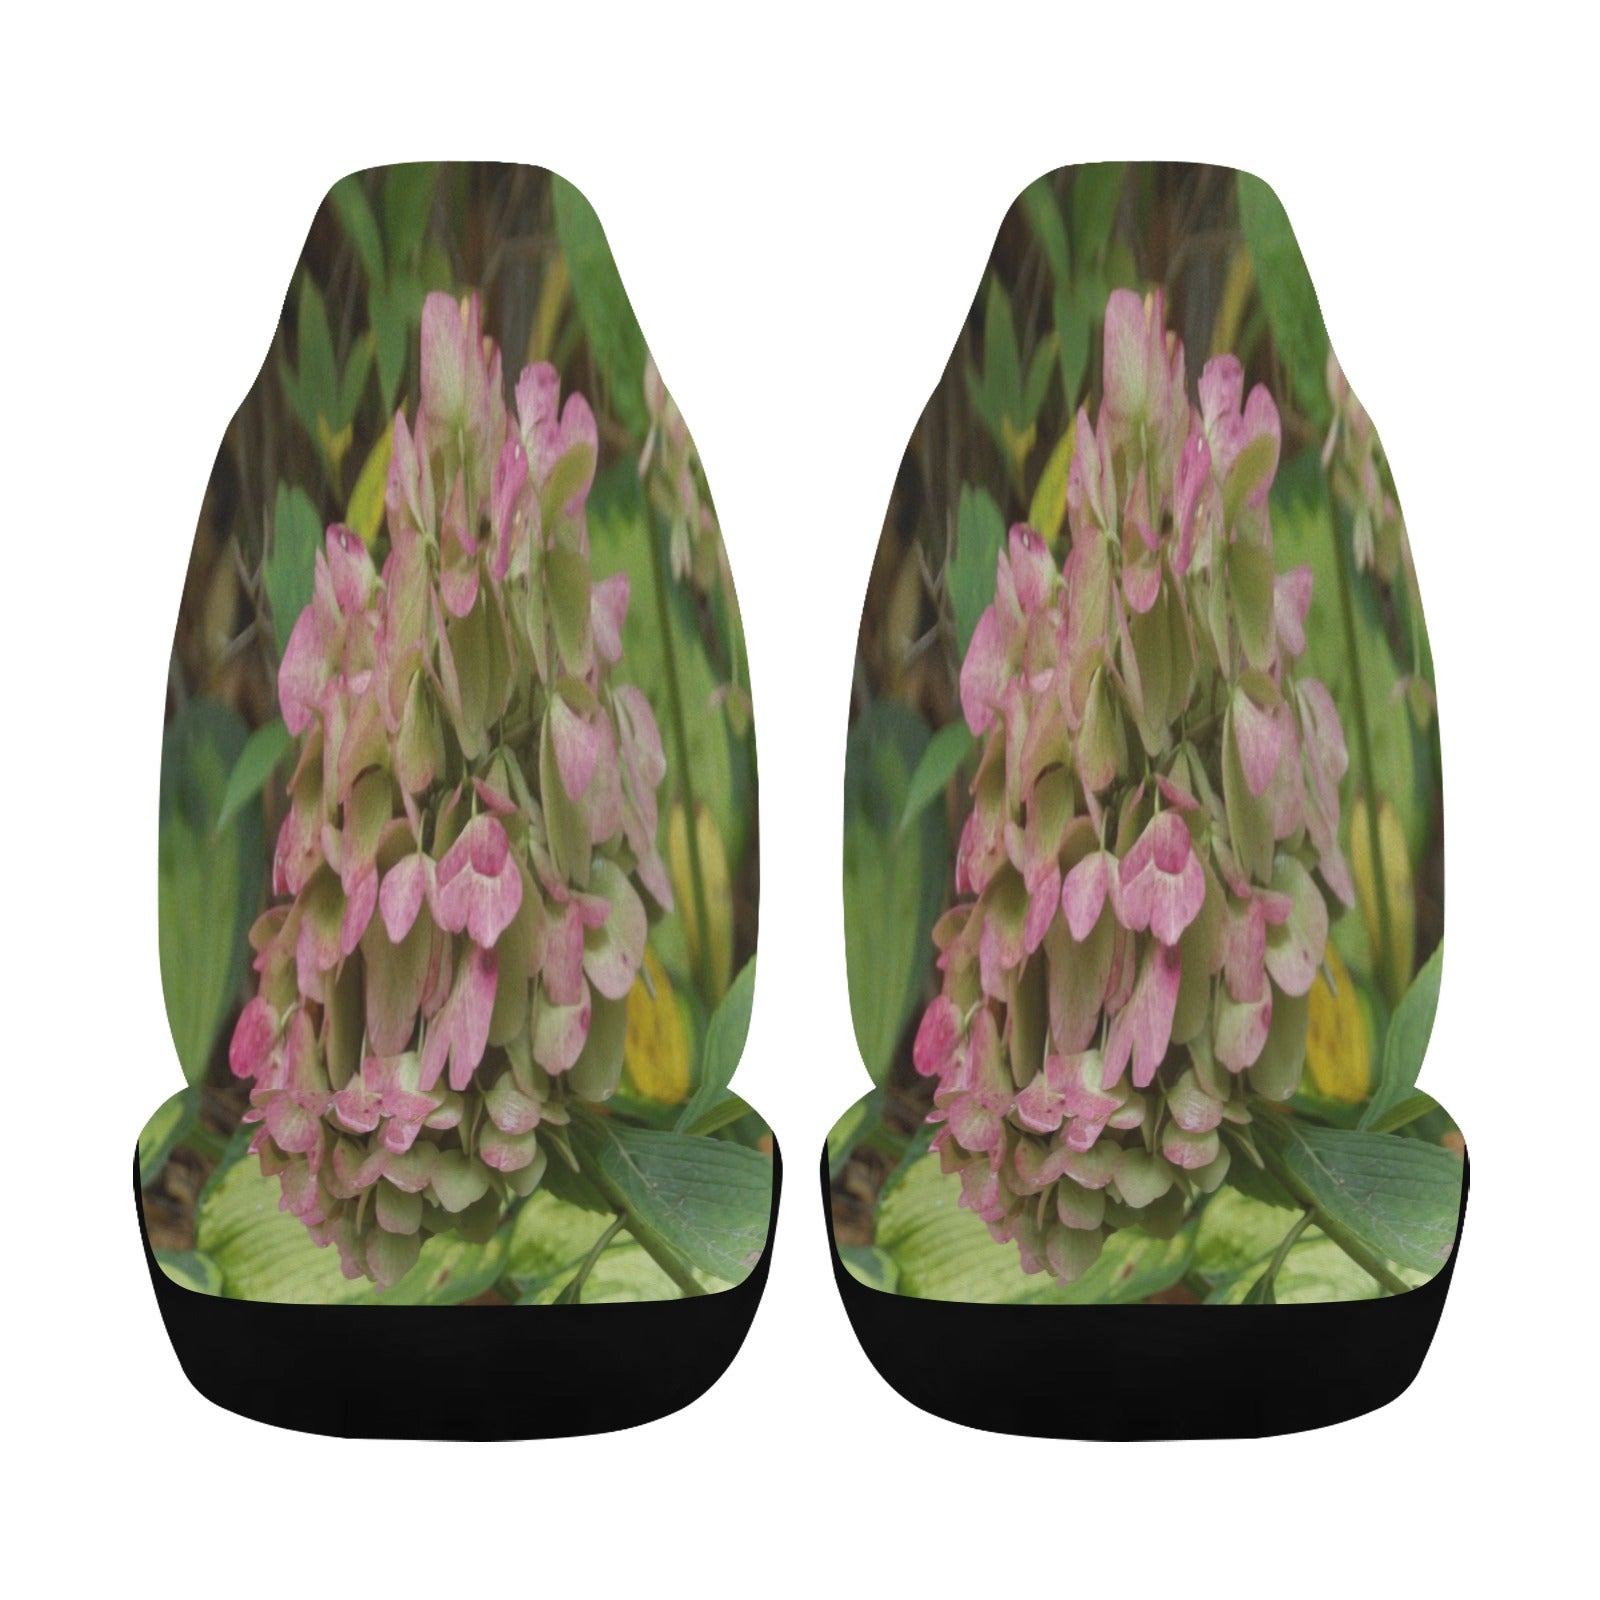 Floral Car Seat Covers, Autumn Hydrangea Bloom with Golden Hosta Leaves